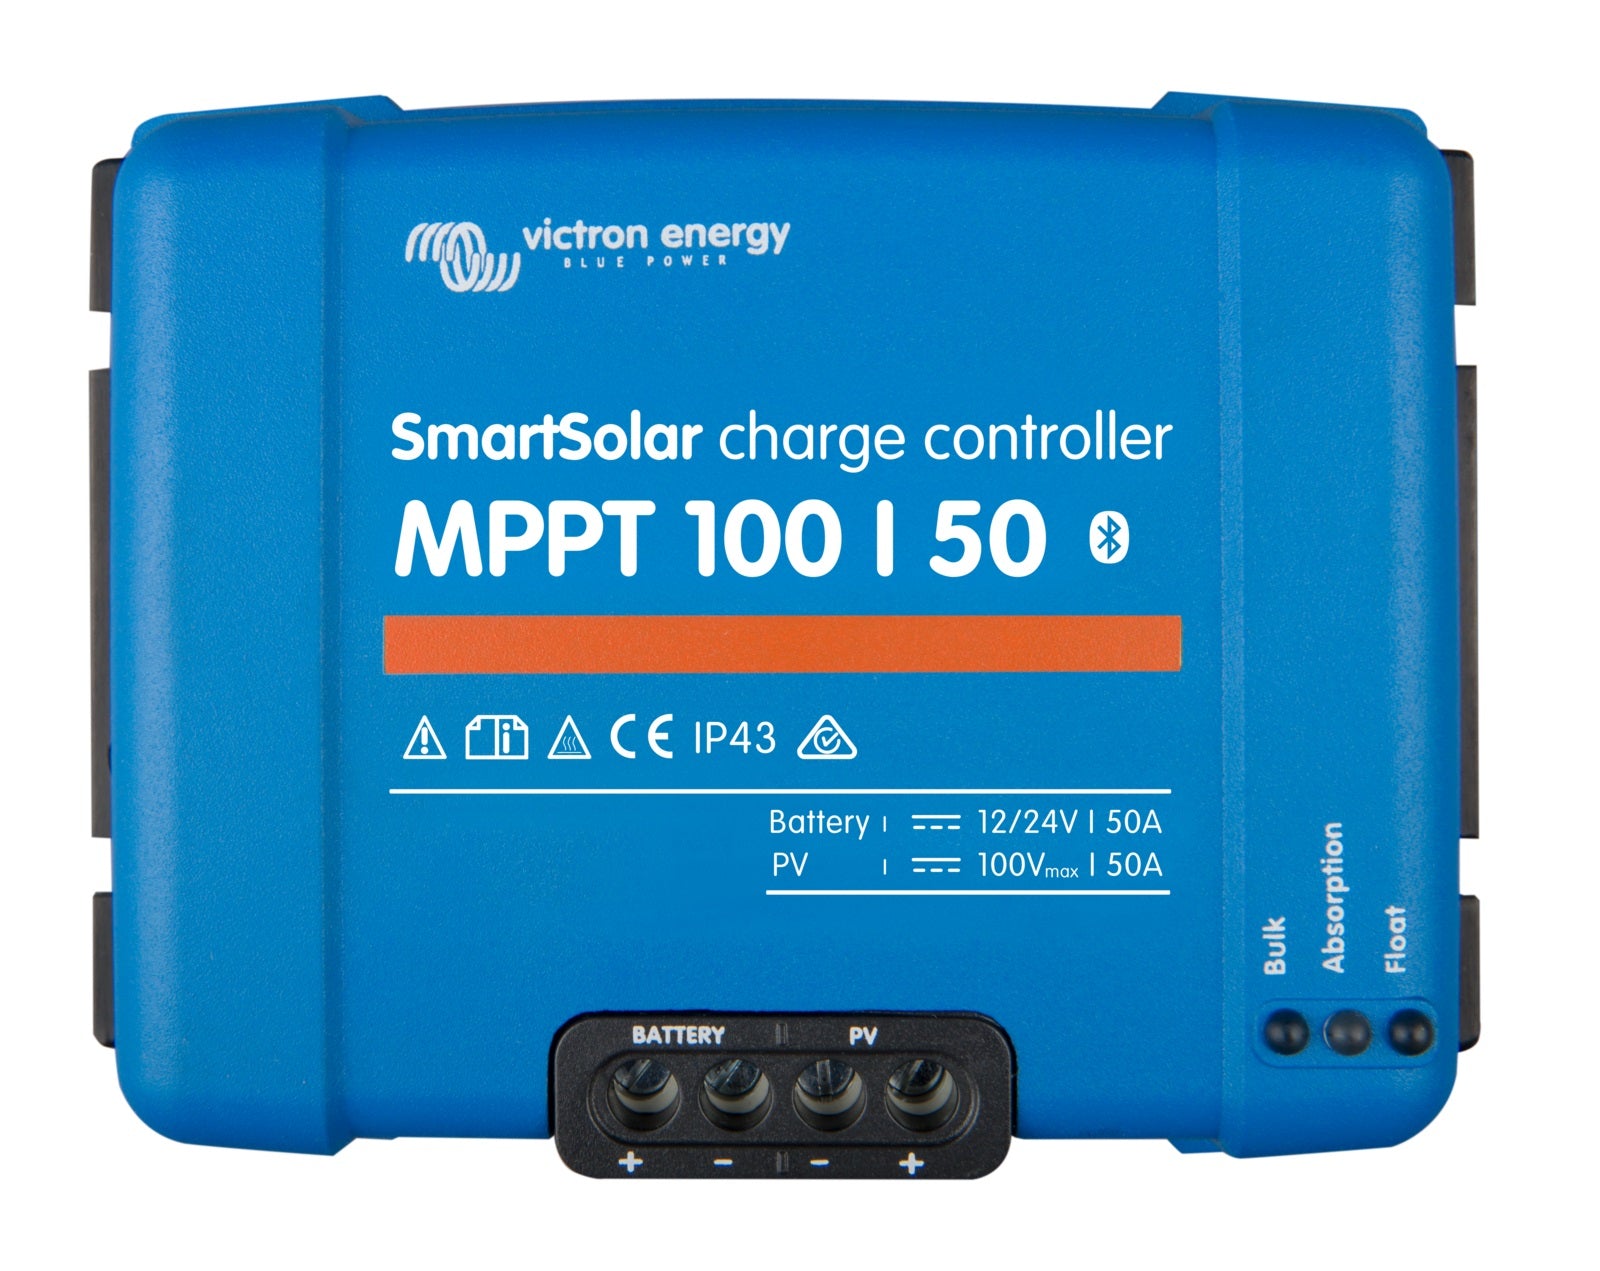 Victron Energy SmartSolar MPPT 100/50 (12/24-50A) Bluetooth Solar Charge Controller | Victron Energy